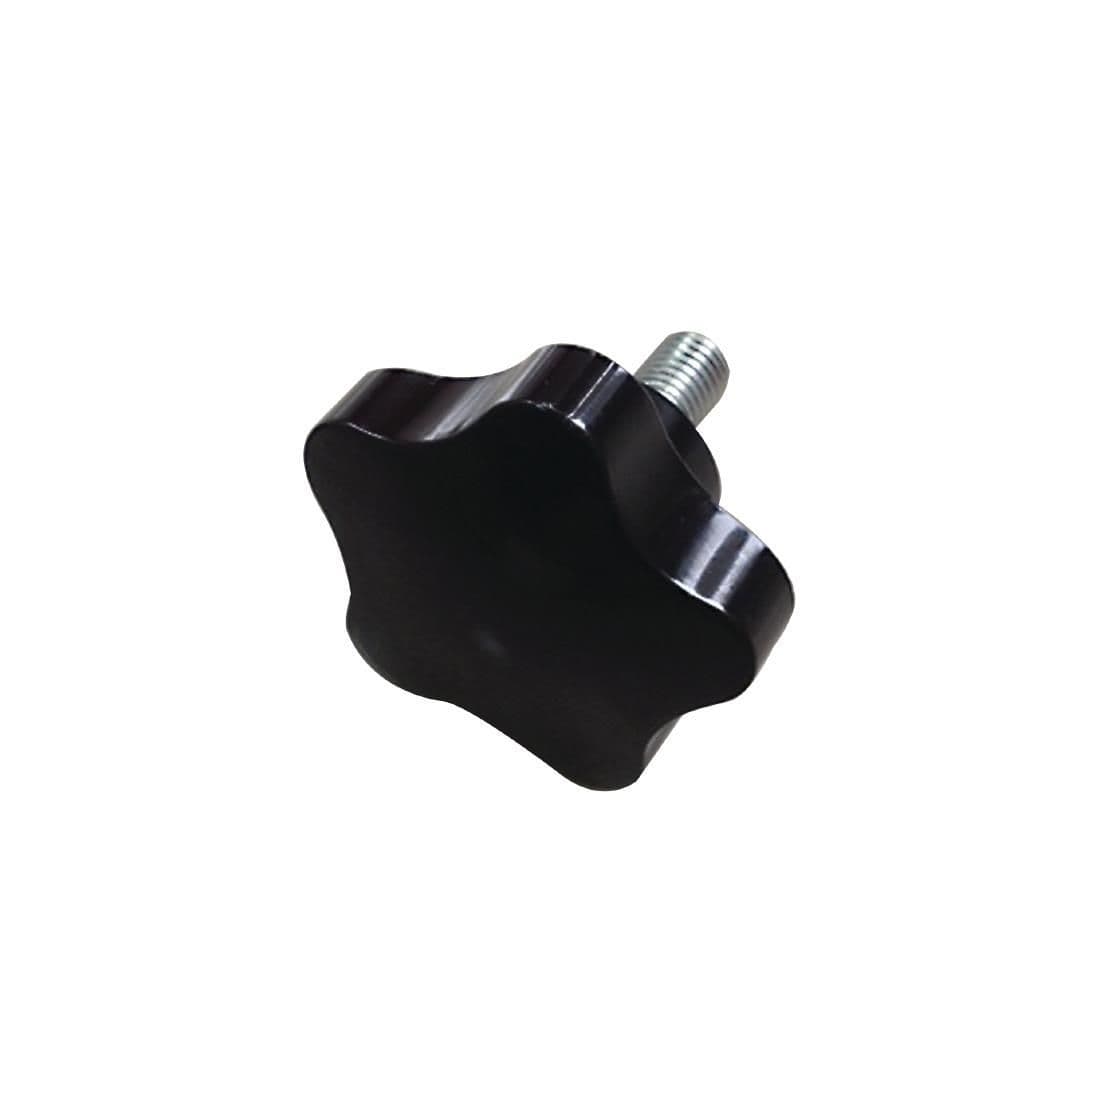 AD480 Buffalo Carriage Knob JD Catering Equipment Solutions Ltd